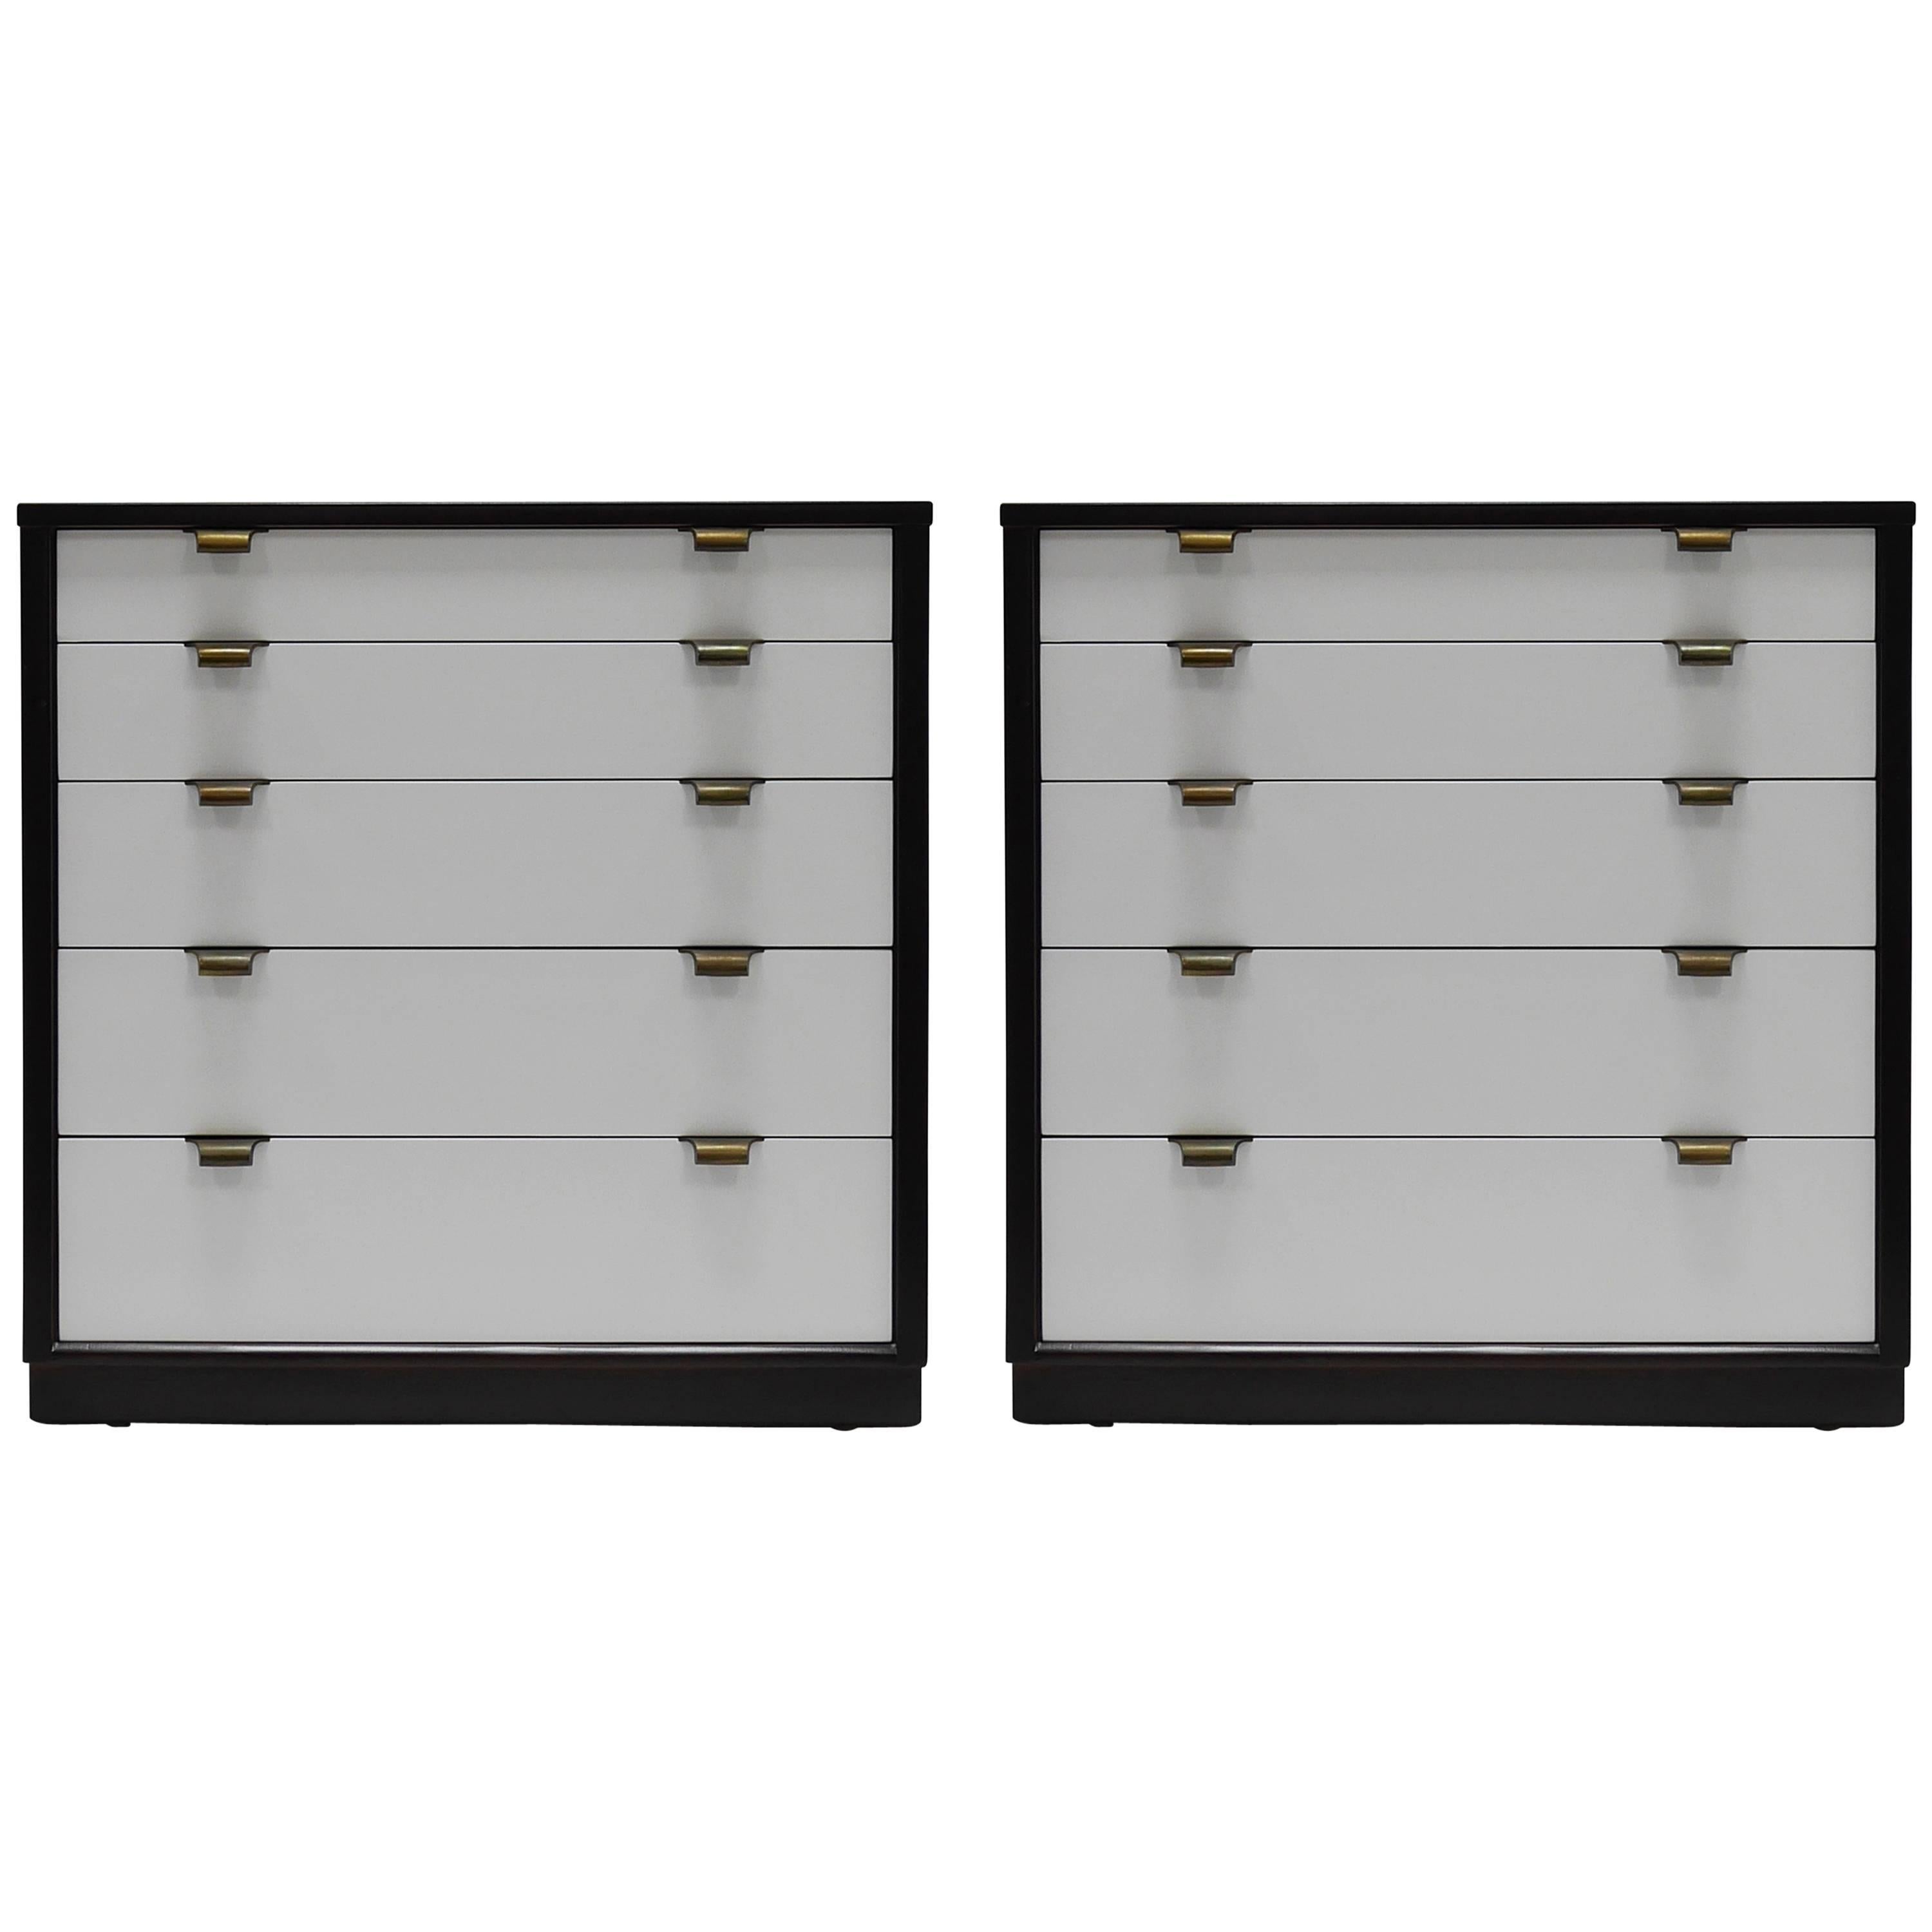 Pair of Dressers in Walnut and White Lacquer by Edward Wormley